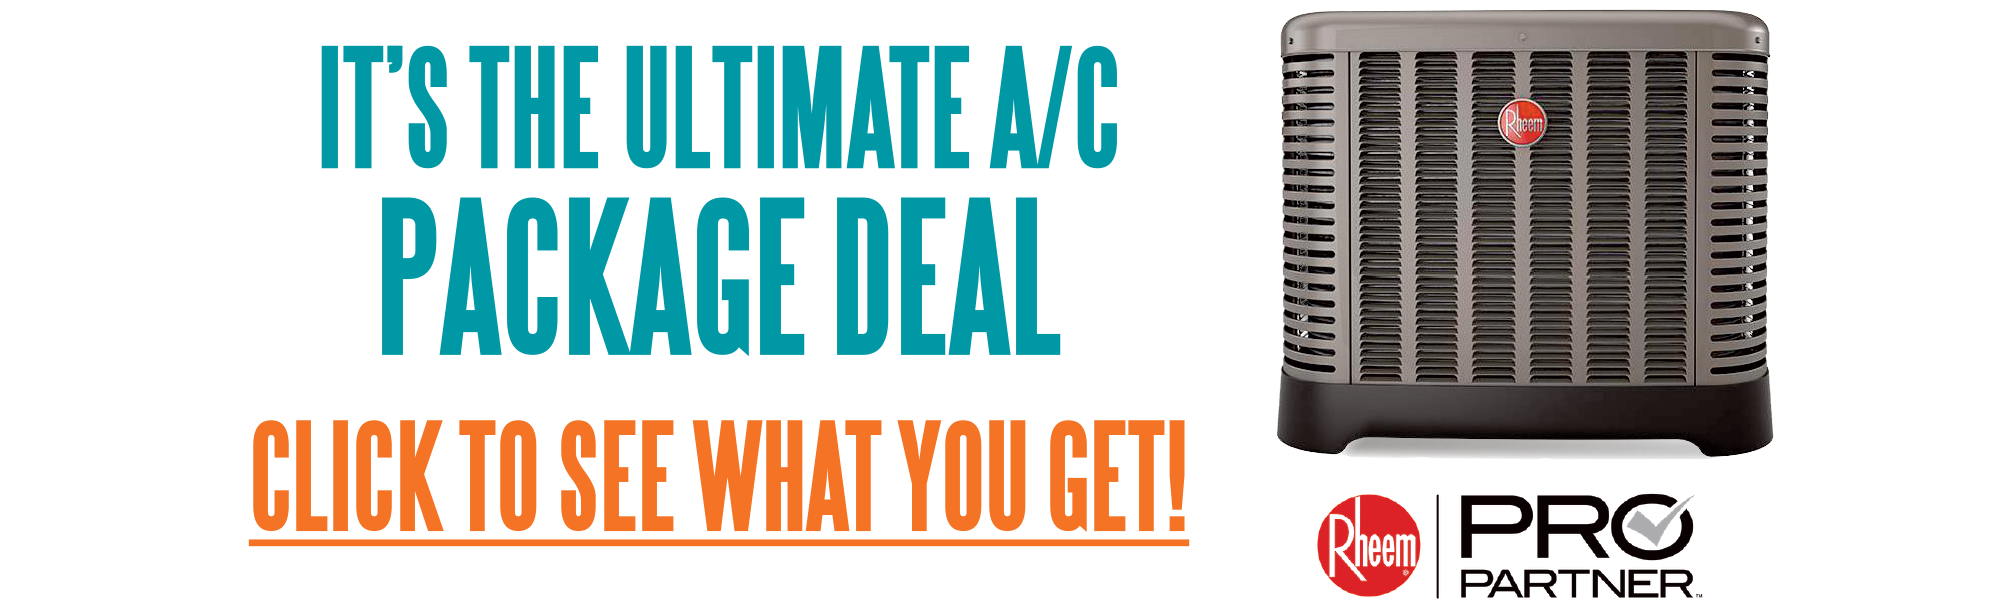 For a AC installation or repair estimate in Surnise FL, call today for a quote!